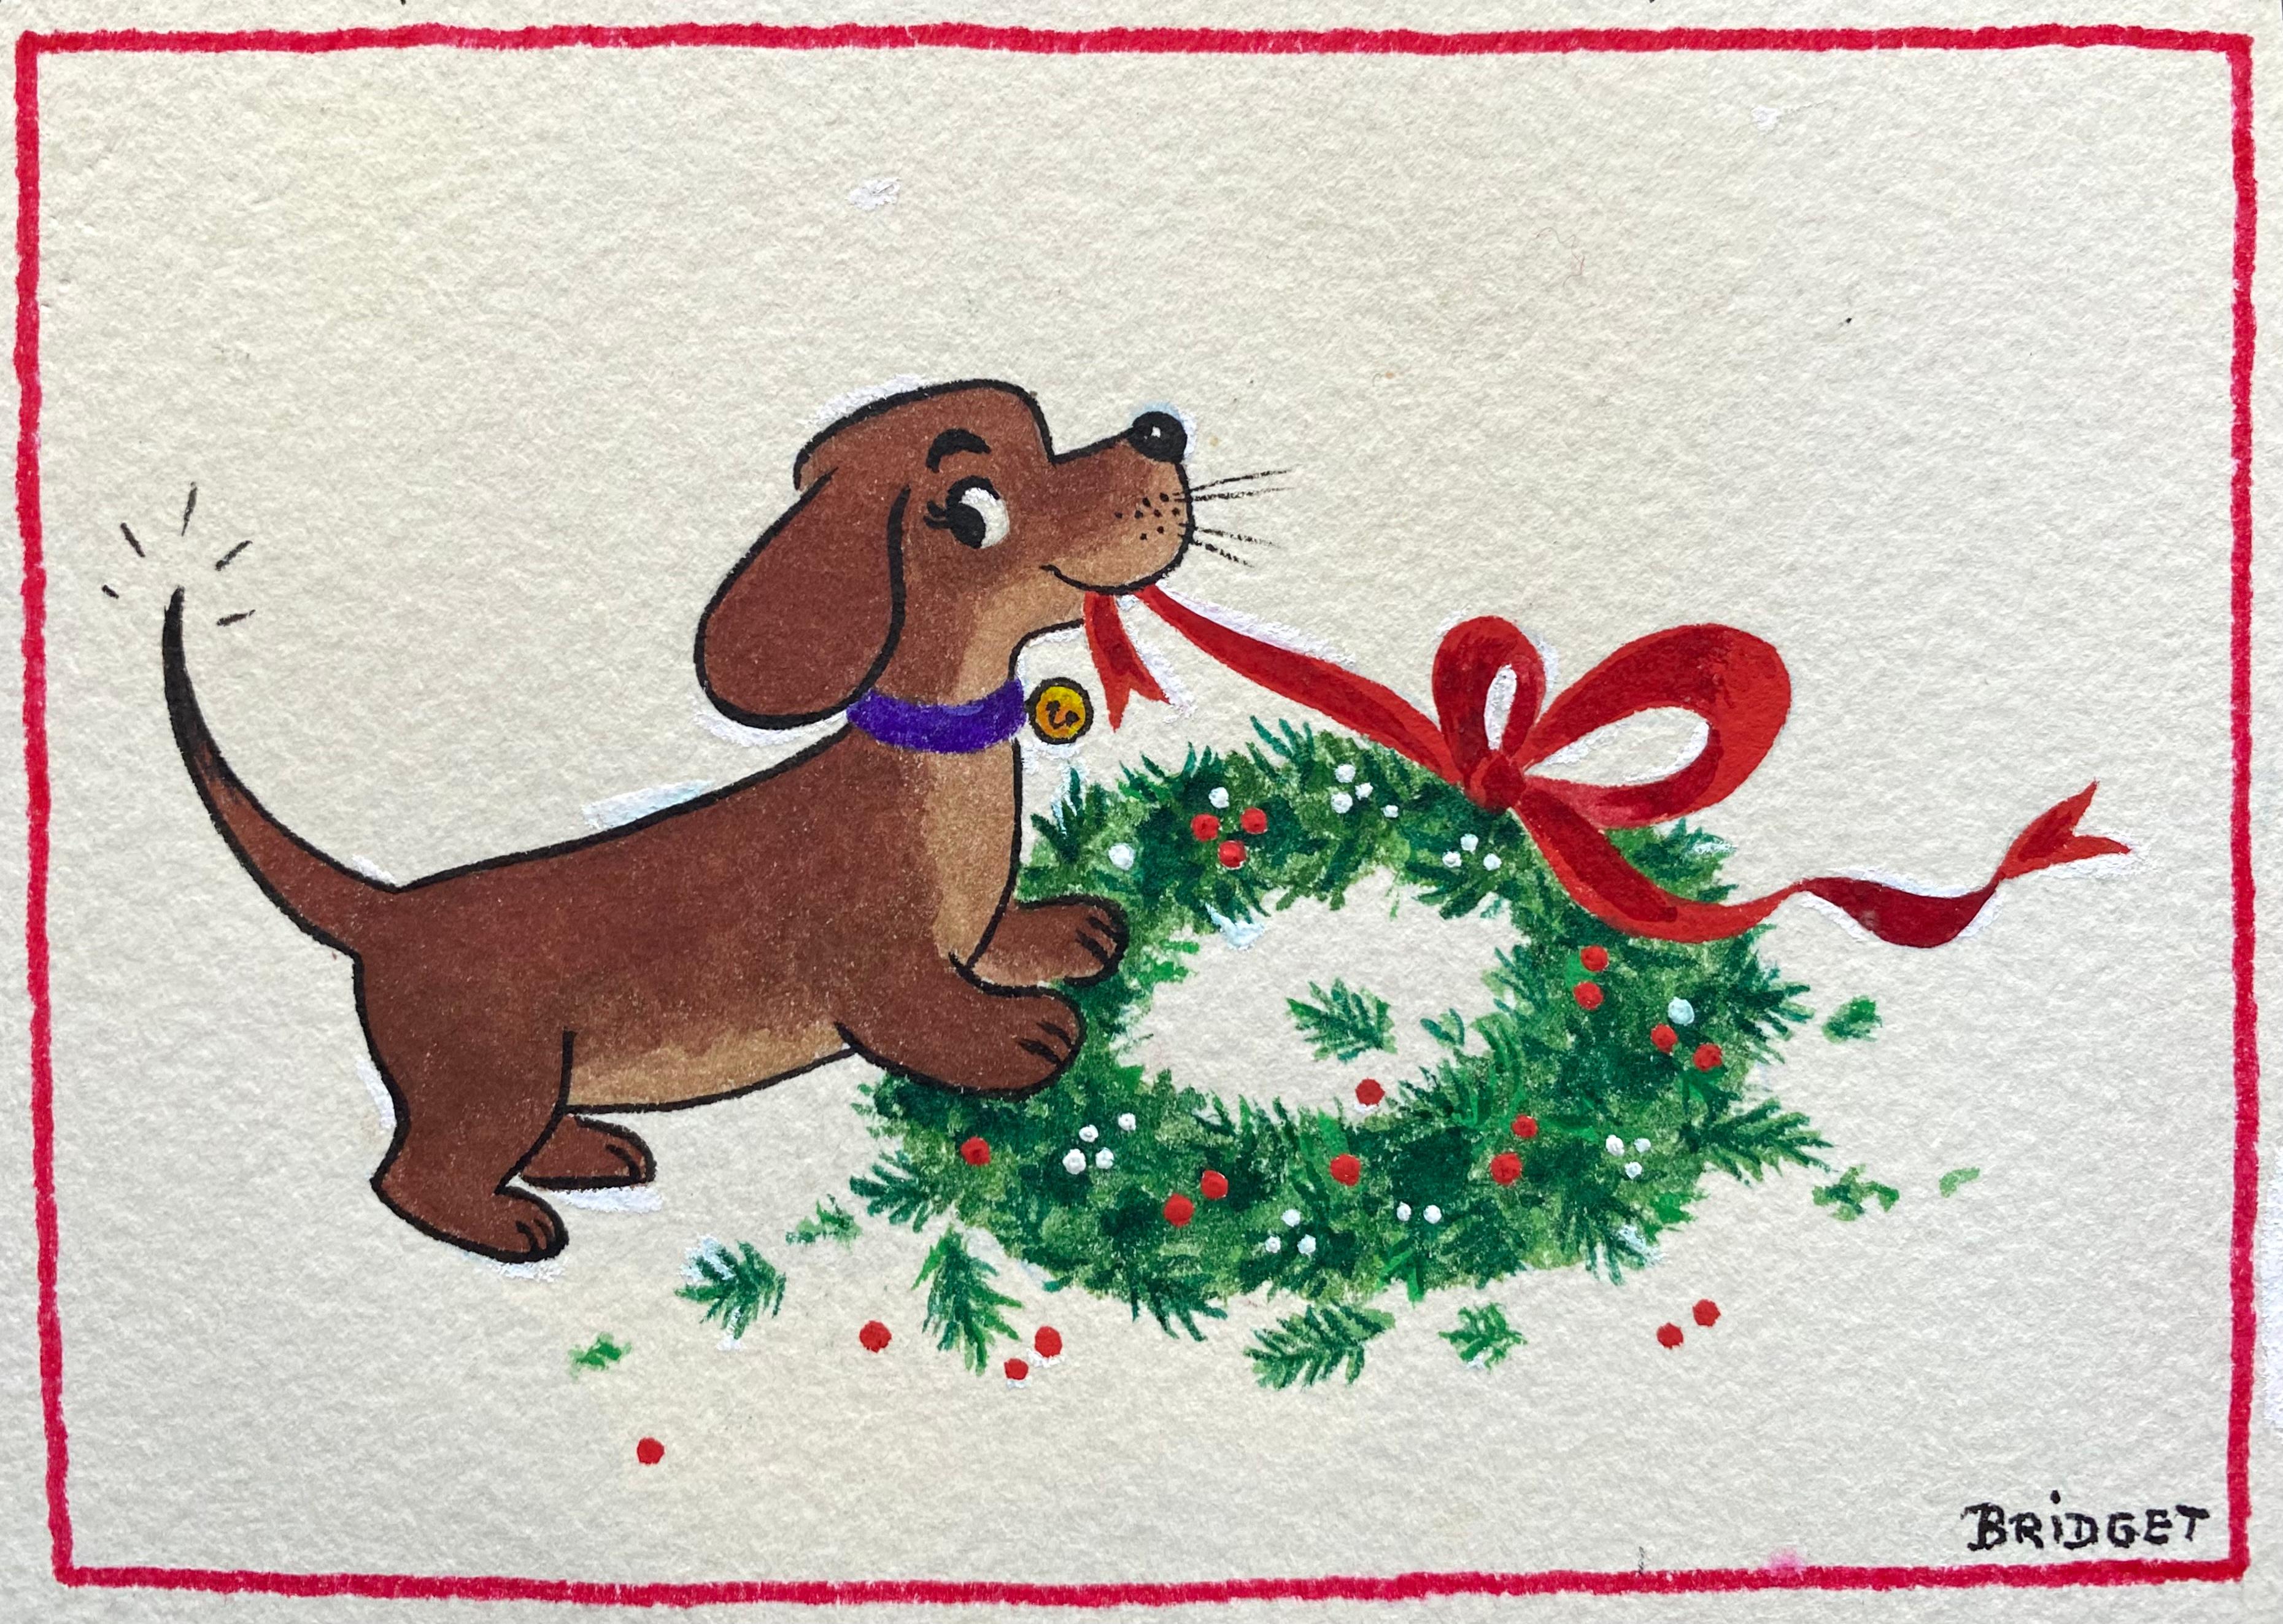 Unknown Animal Art - “Puppy with Christmas Wreath”